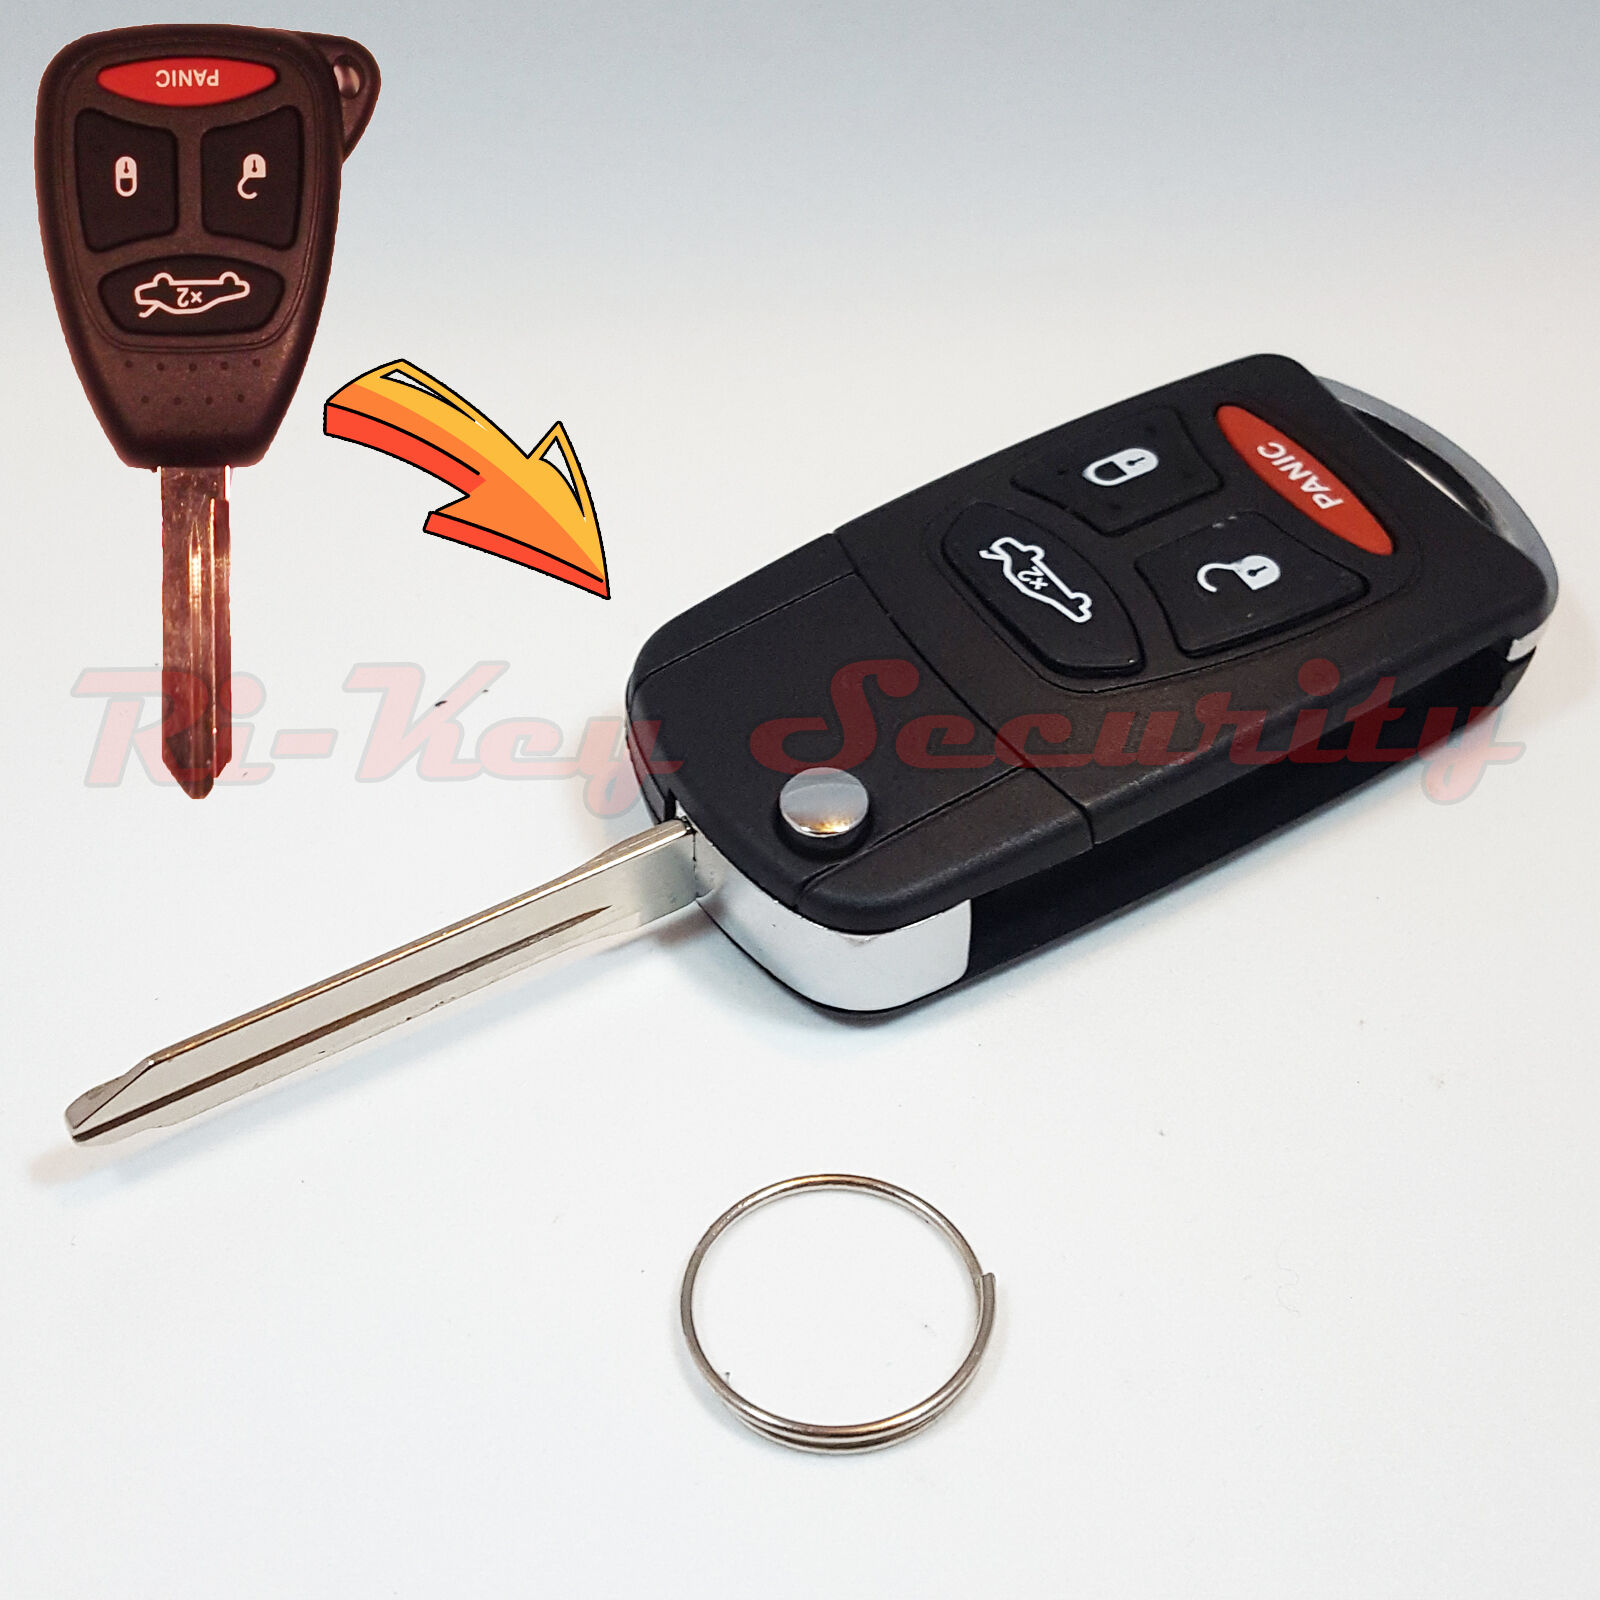 New Flip Key Modified Case Shell For Chrysler Dodge Jeep Remote Key 4 Buttons 3B